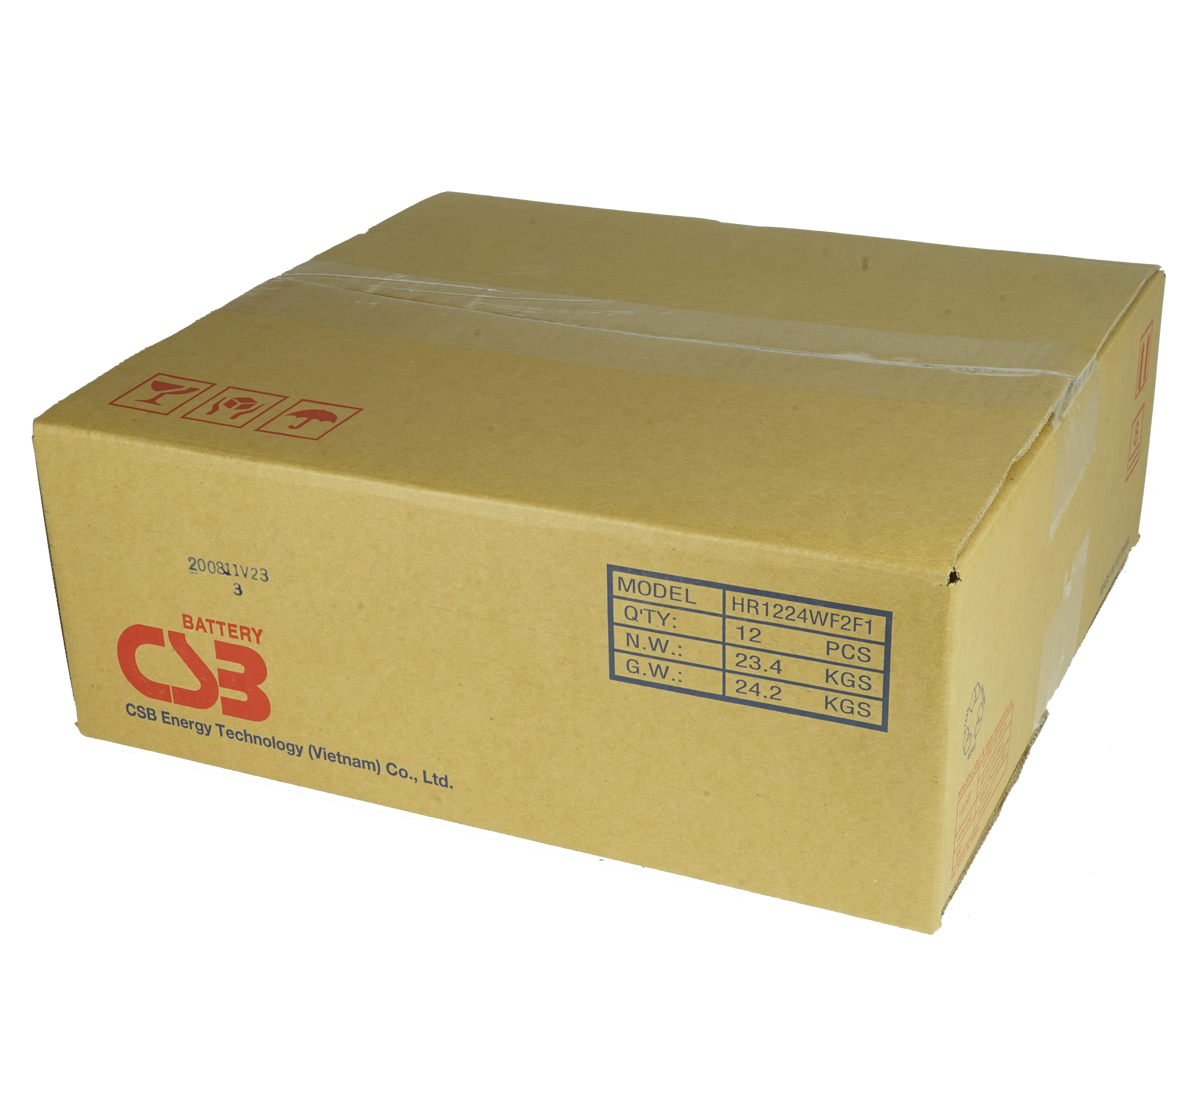 MDS1020 UPS Battery kit for MGE AB1020